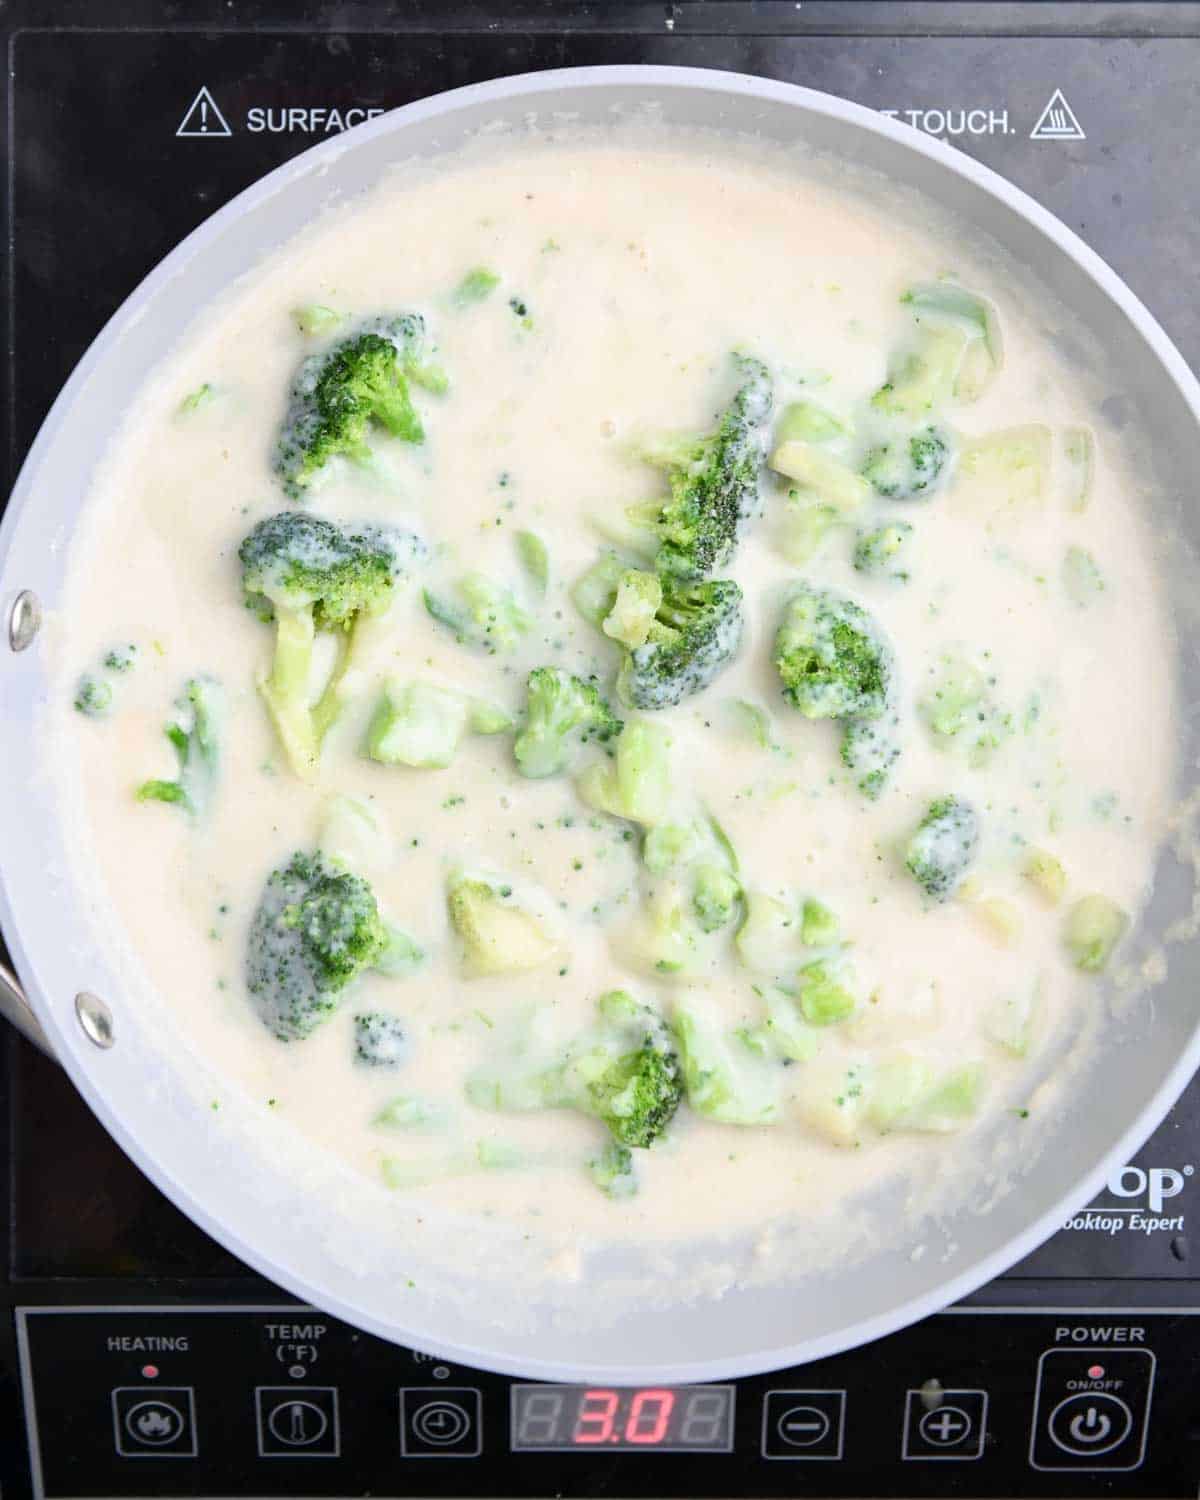 Broccoli in a creamy sauce in a gray skillet.